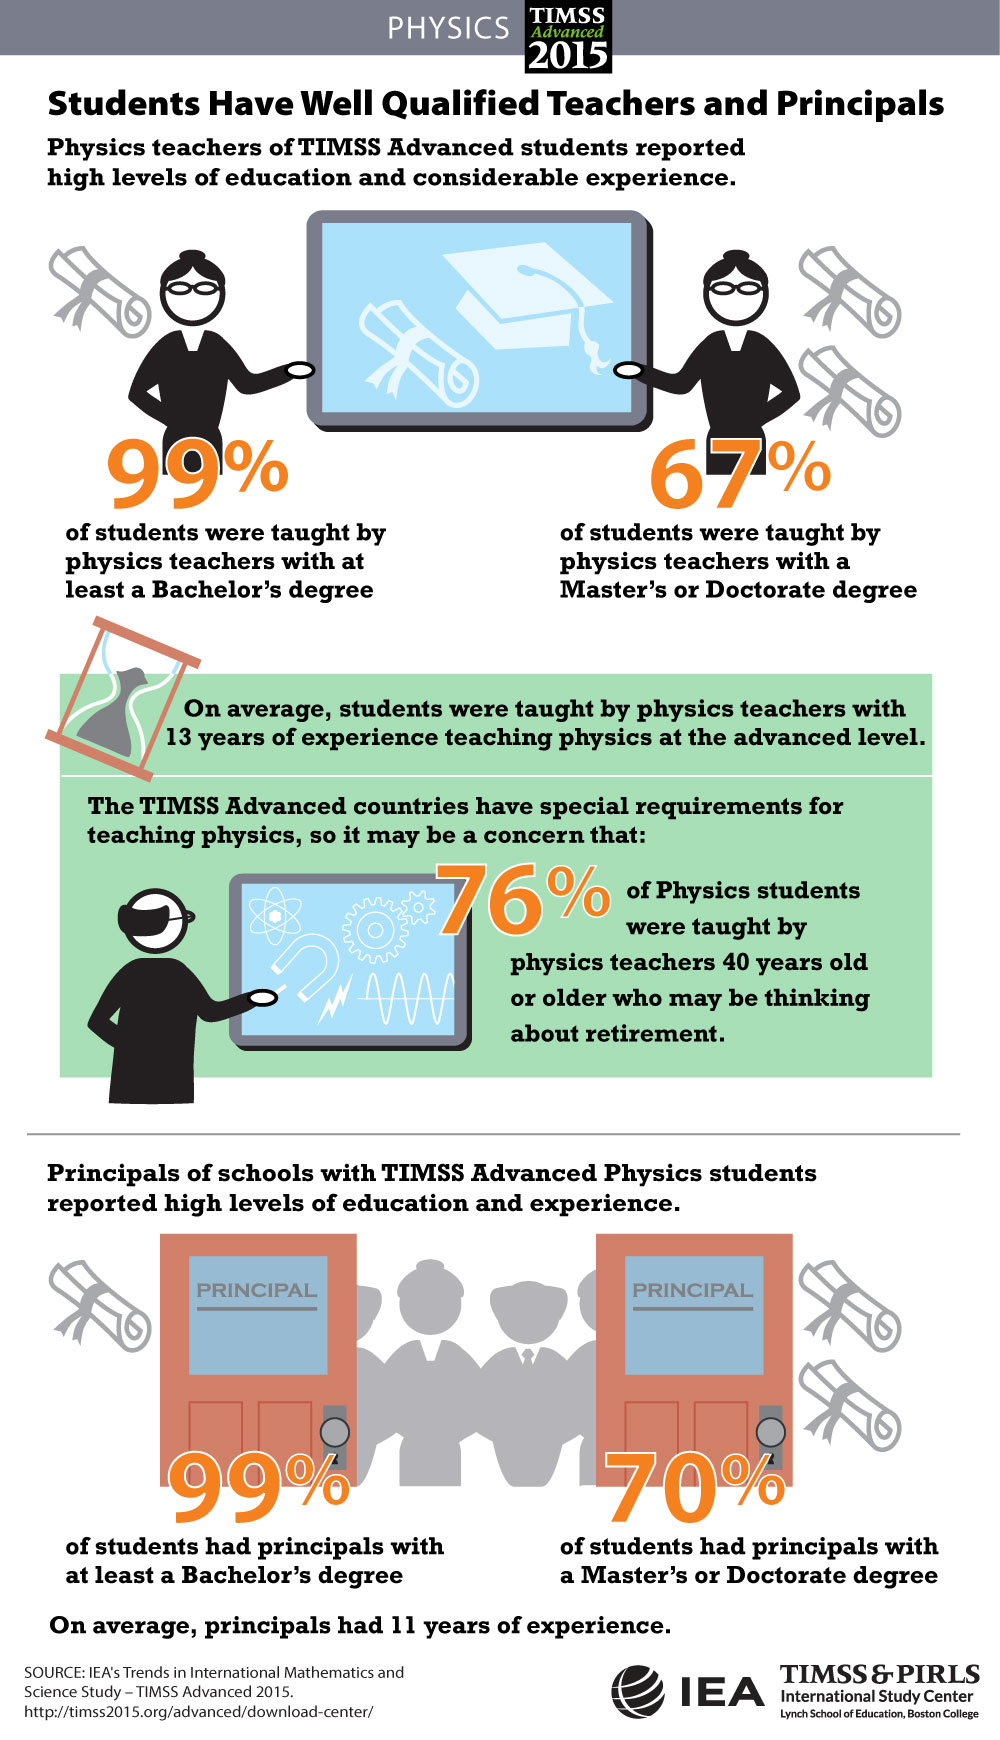 Teachers' and Principals' Preparation Overview Infographic